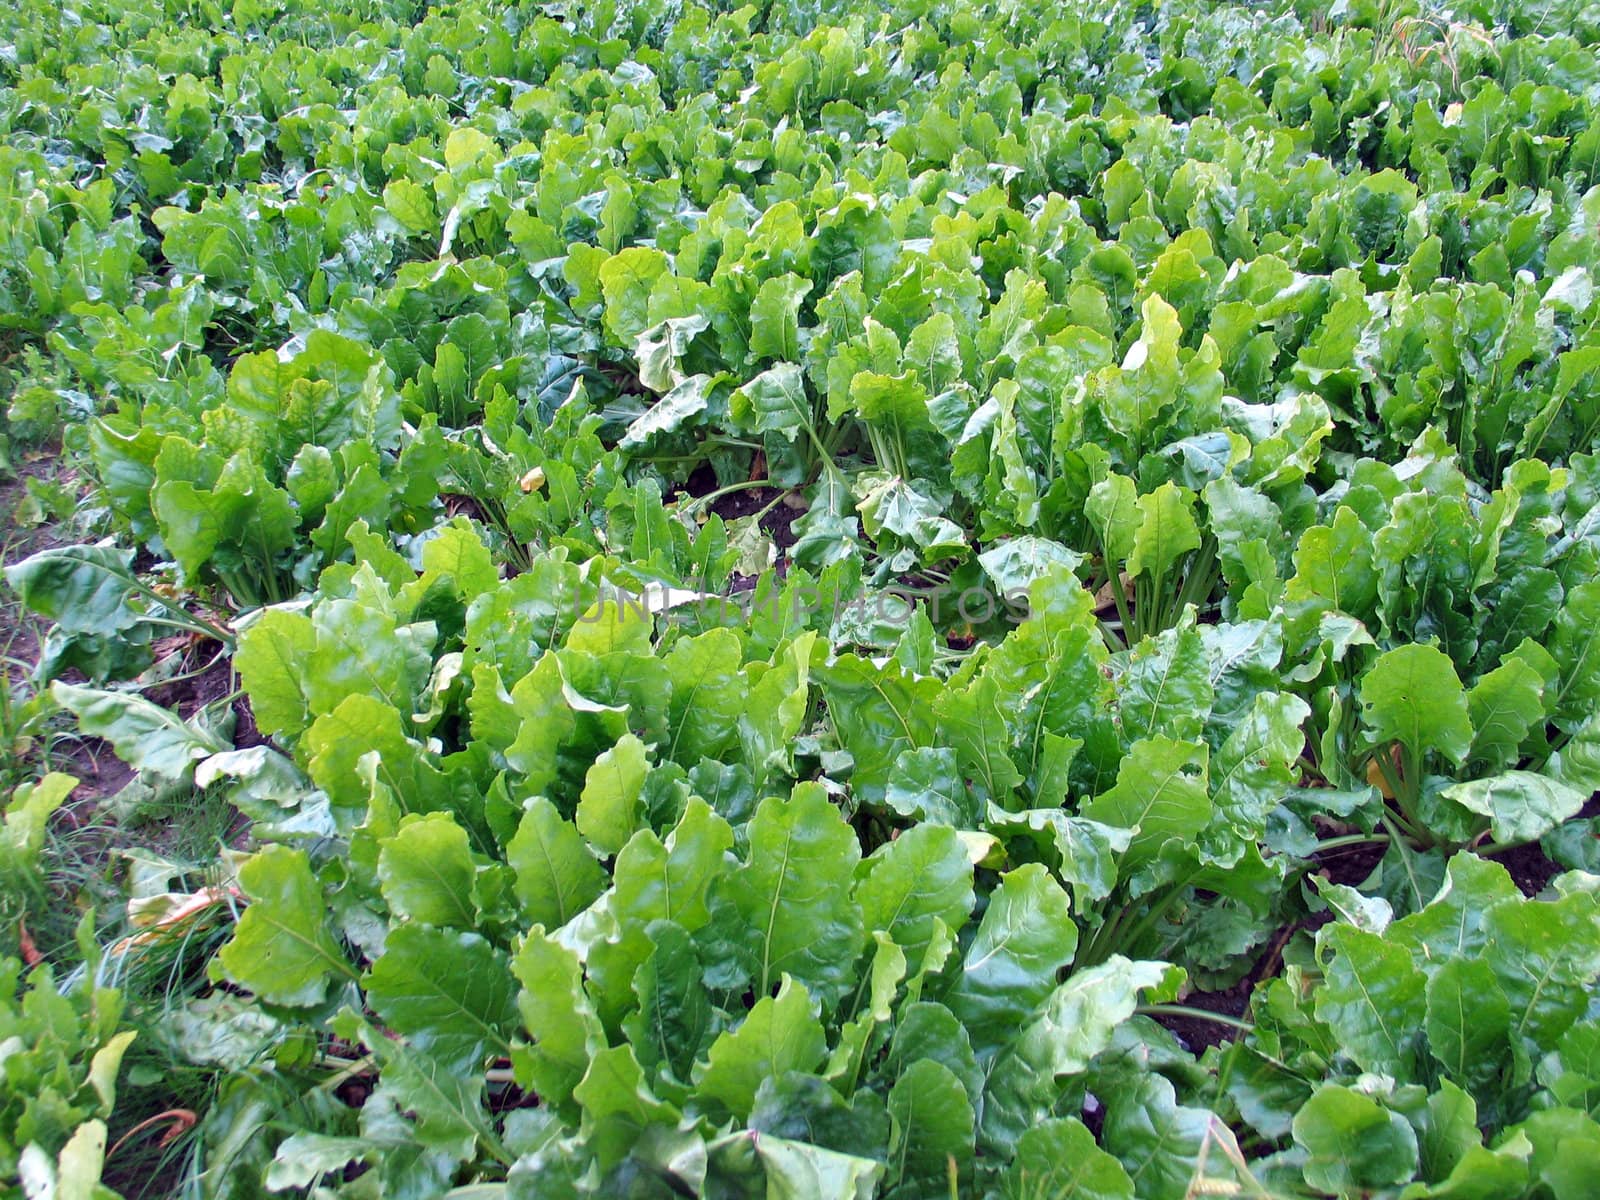 Field of green fresh sugar beets in the season just before harvest